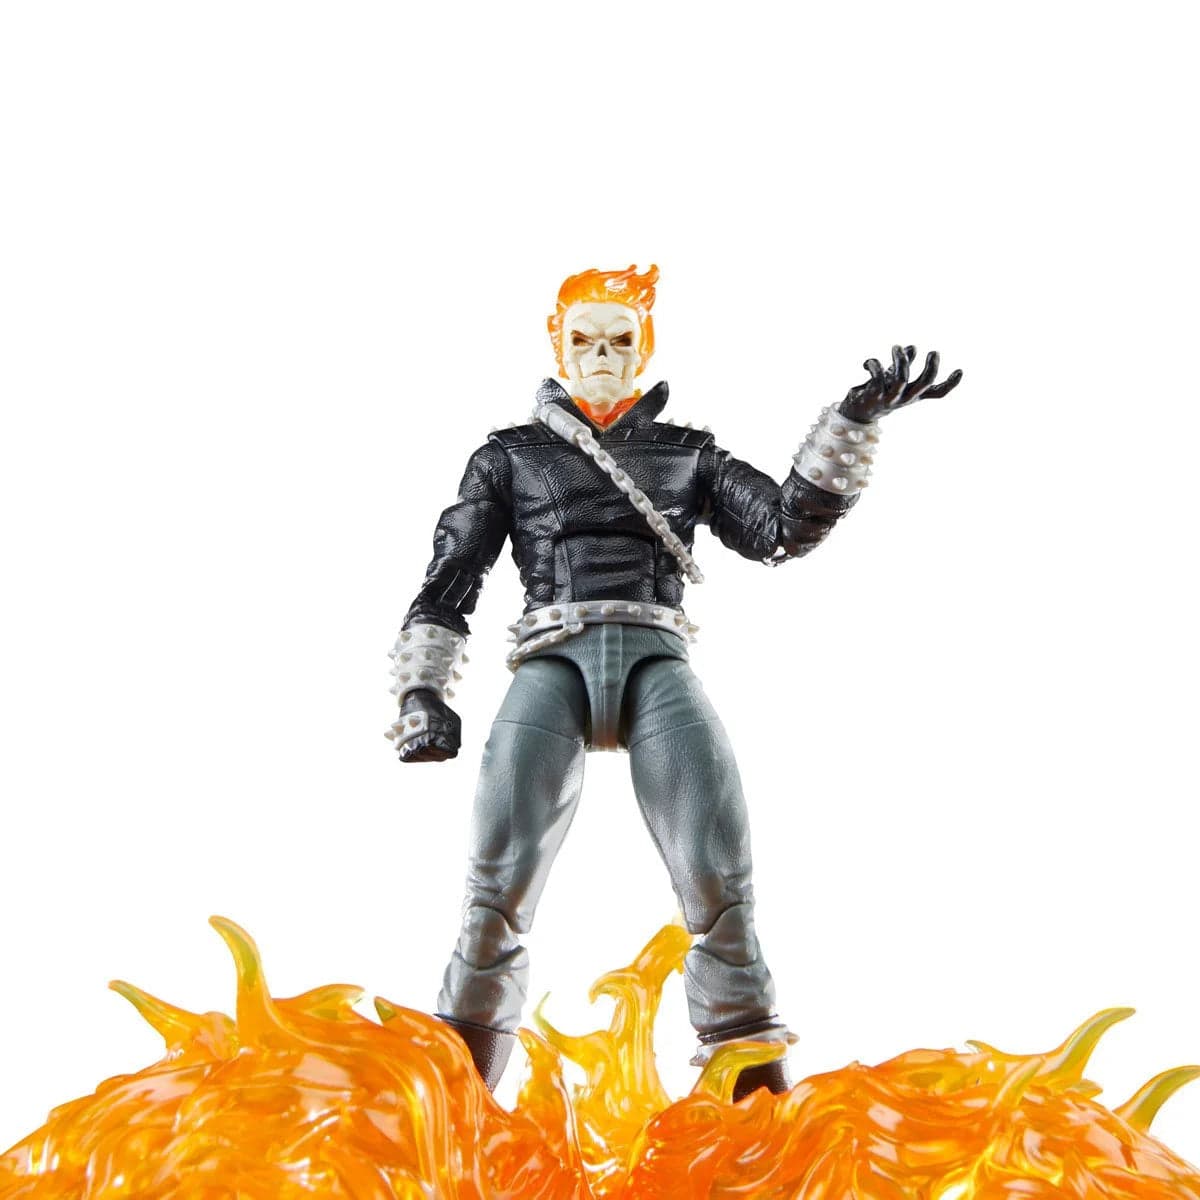 Marvel-Legends-Series-Ghost-Rider-_Danny-Ketch_-with-Motorcycle-Action-Figure-Flame-Pose